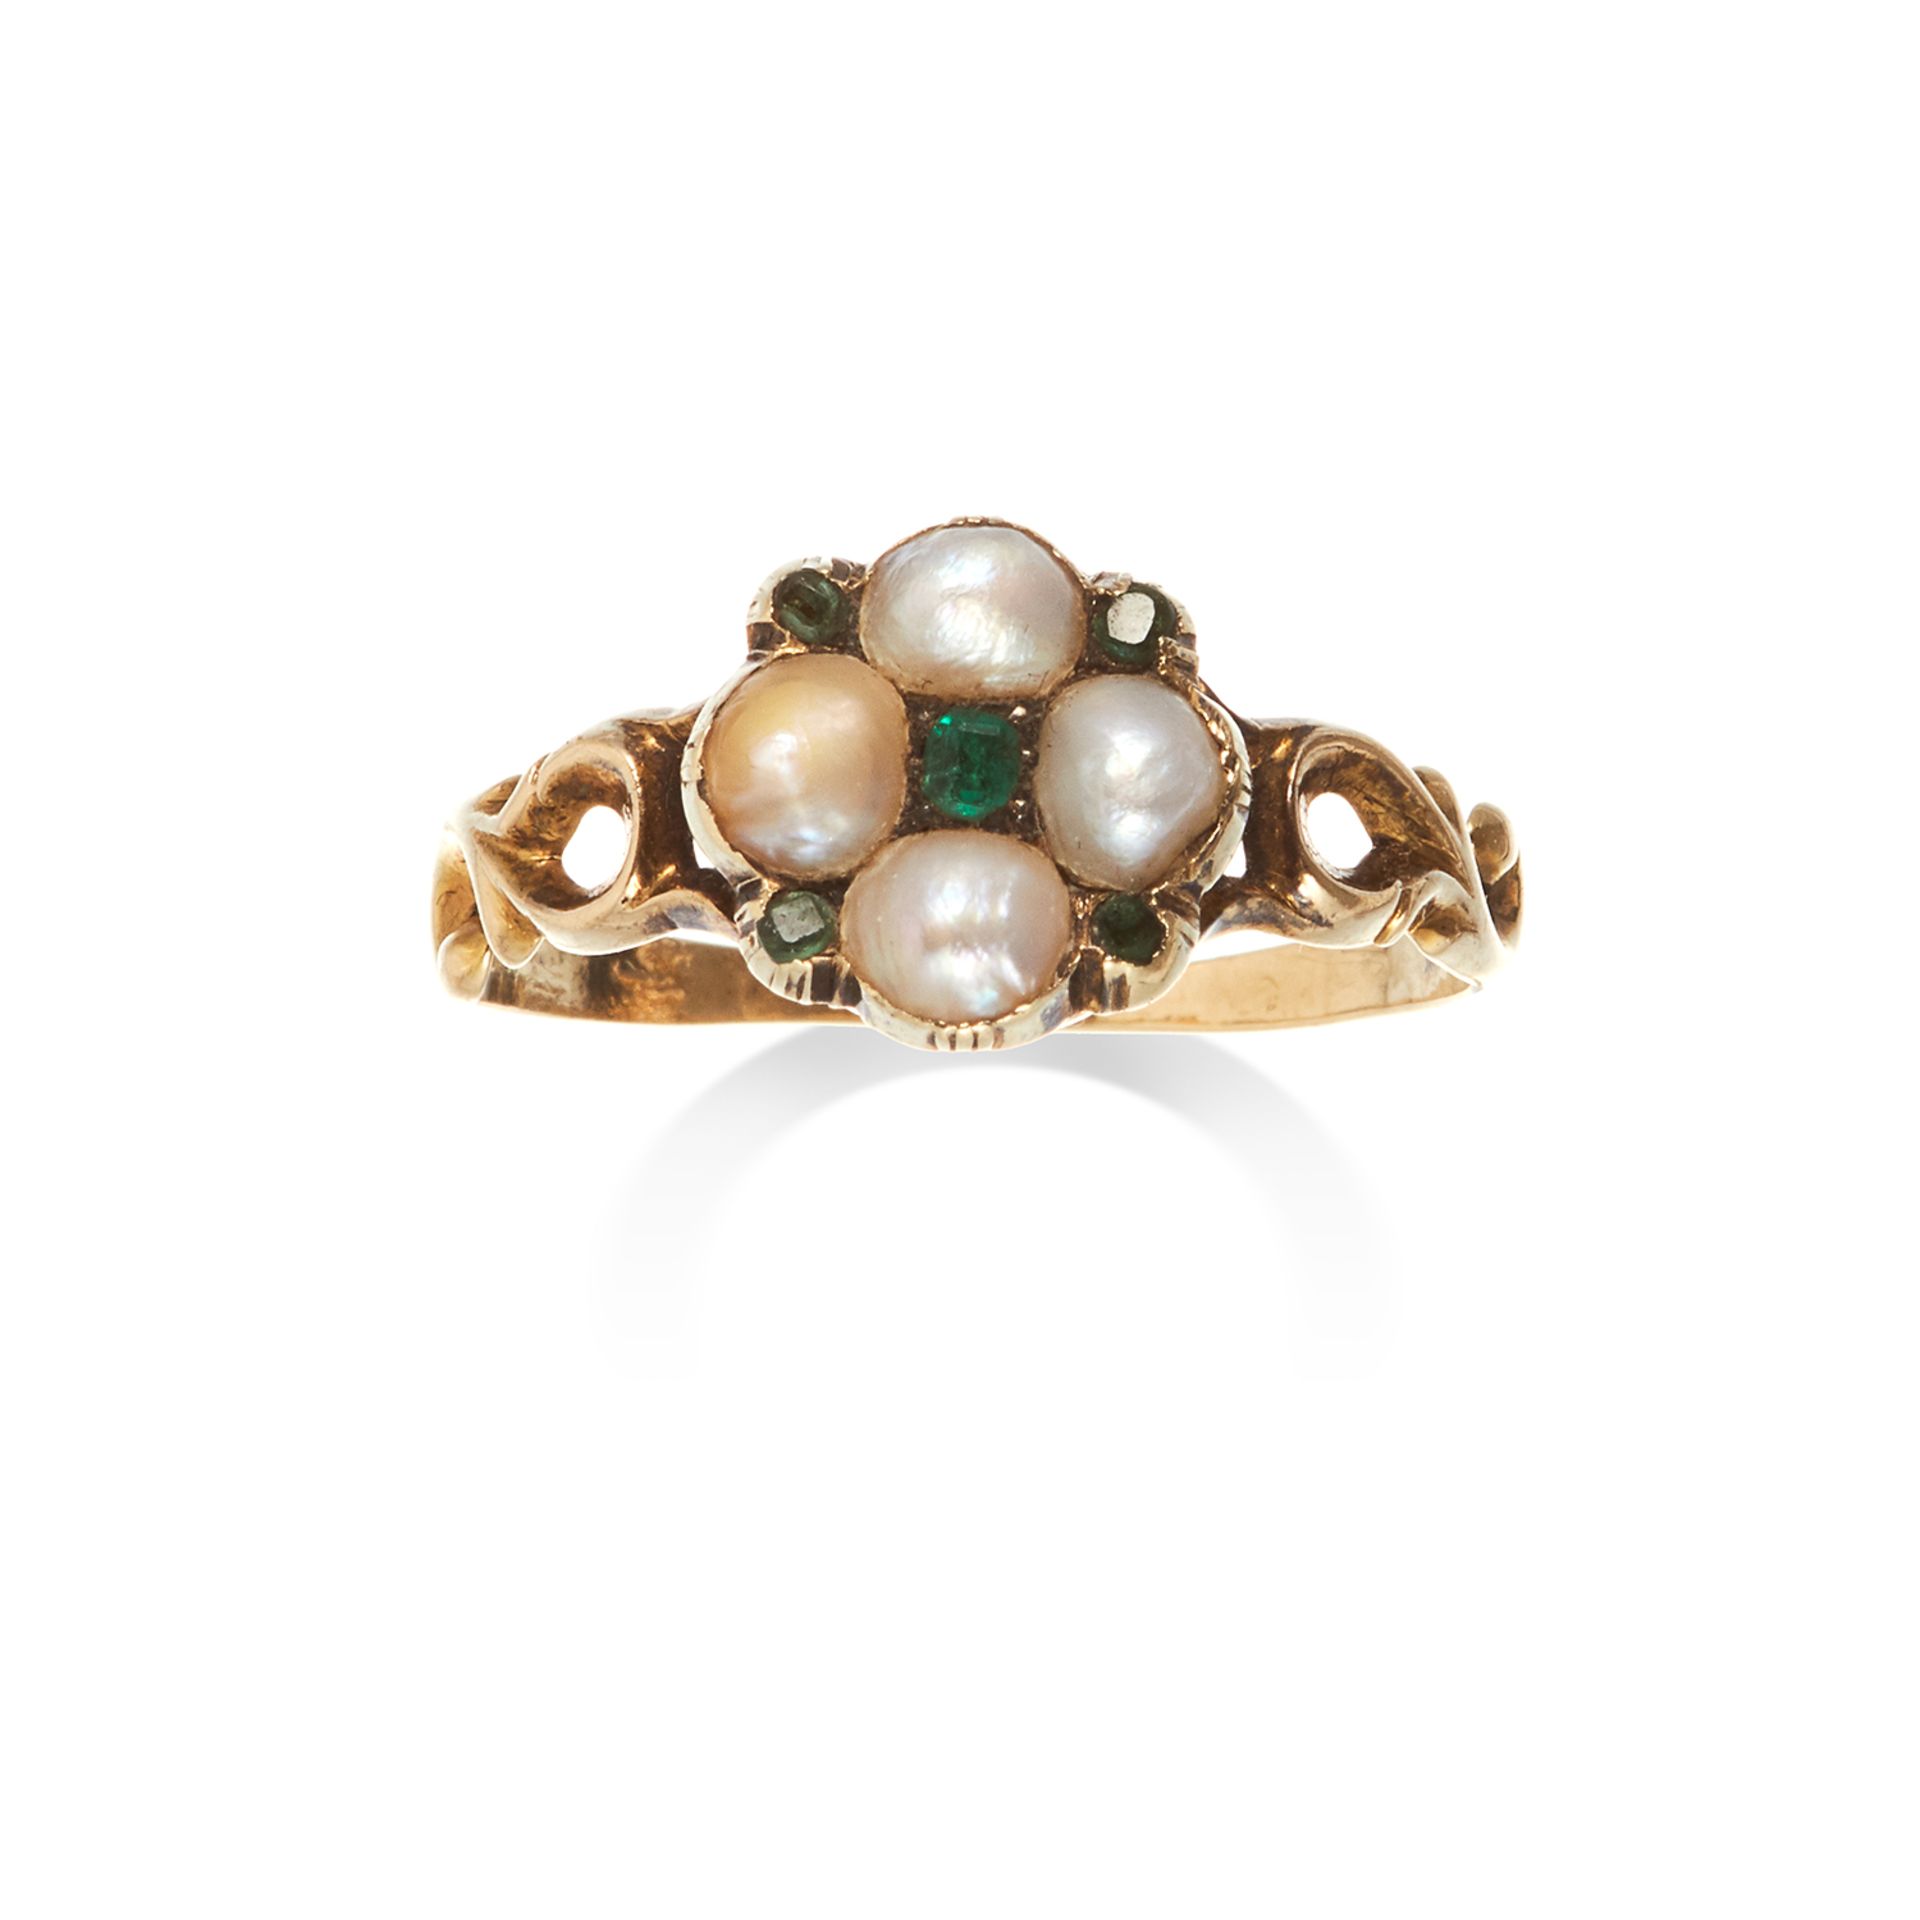 AN ANTIQUE EMERALD AND PEARL RING, EARLY 19TH CENTURY in high carat yellow gold, set with a